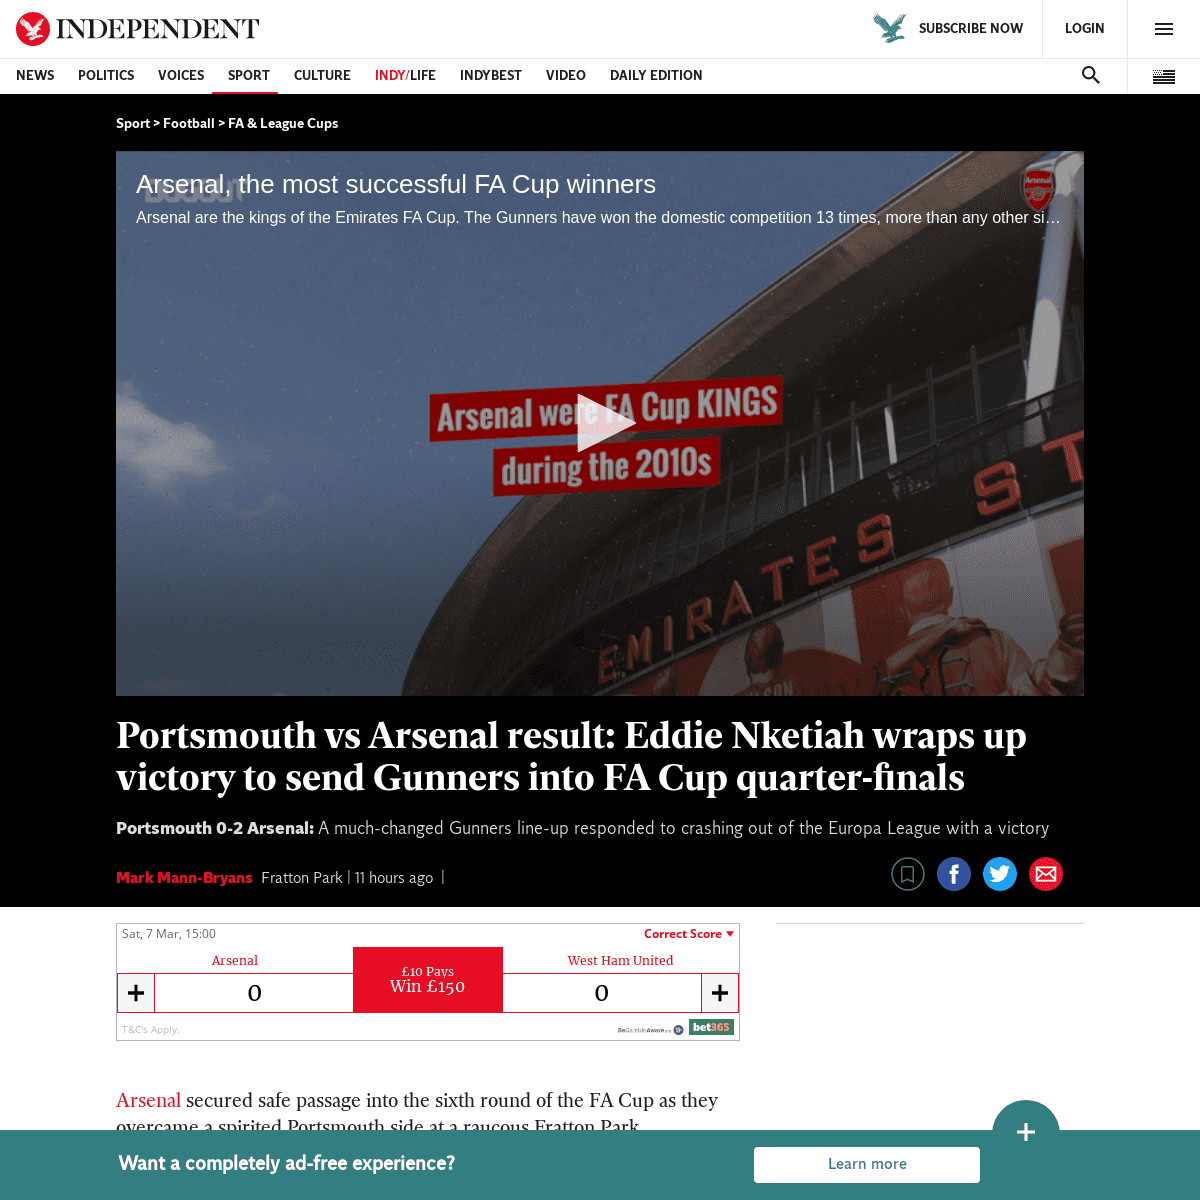 A complete backup of www.independent.co.uk/sport/football/fa-league-cups/portsmouth-arsenal-result-report-eddie-nketiah-goal-fa-